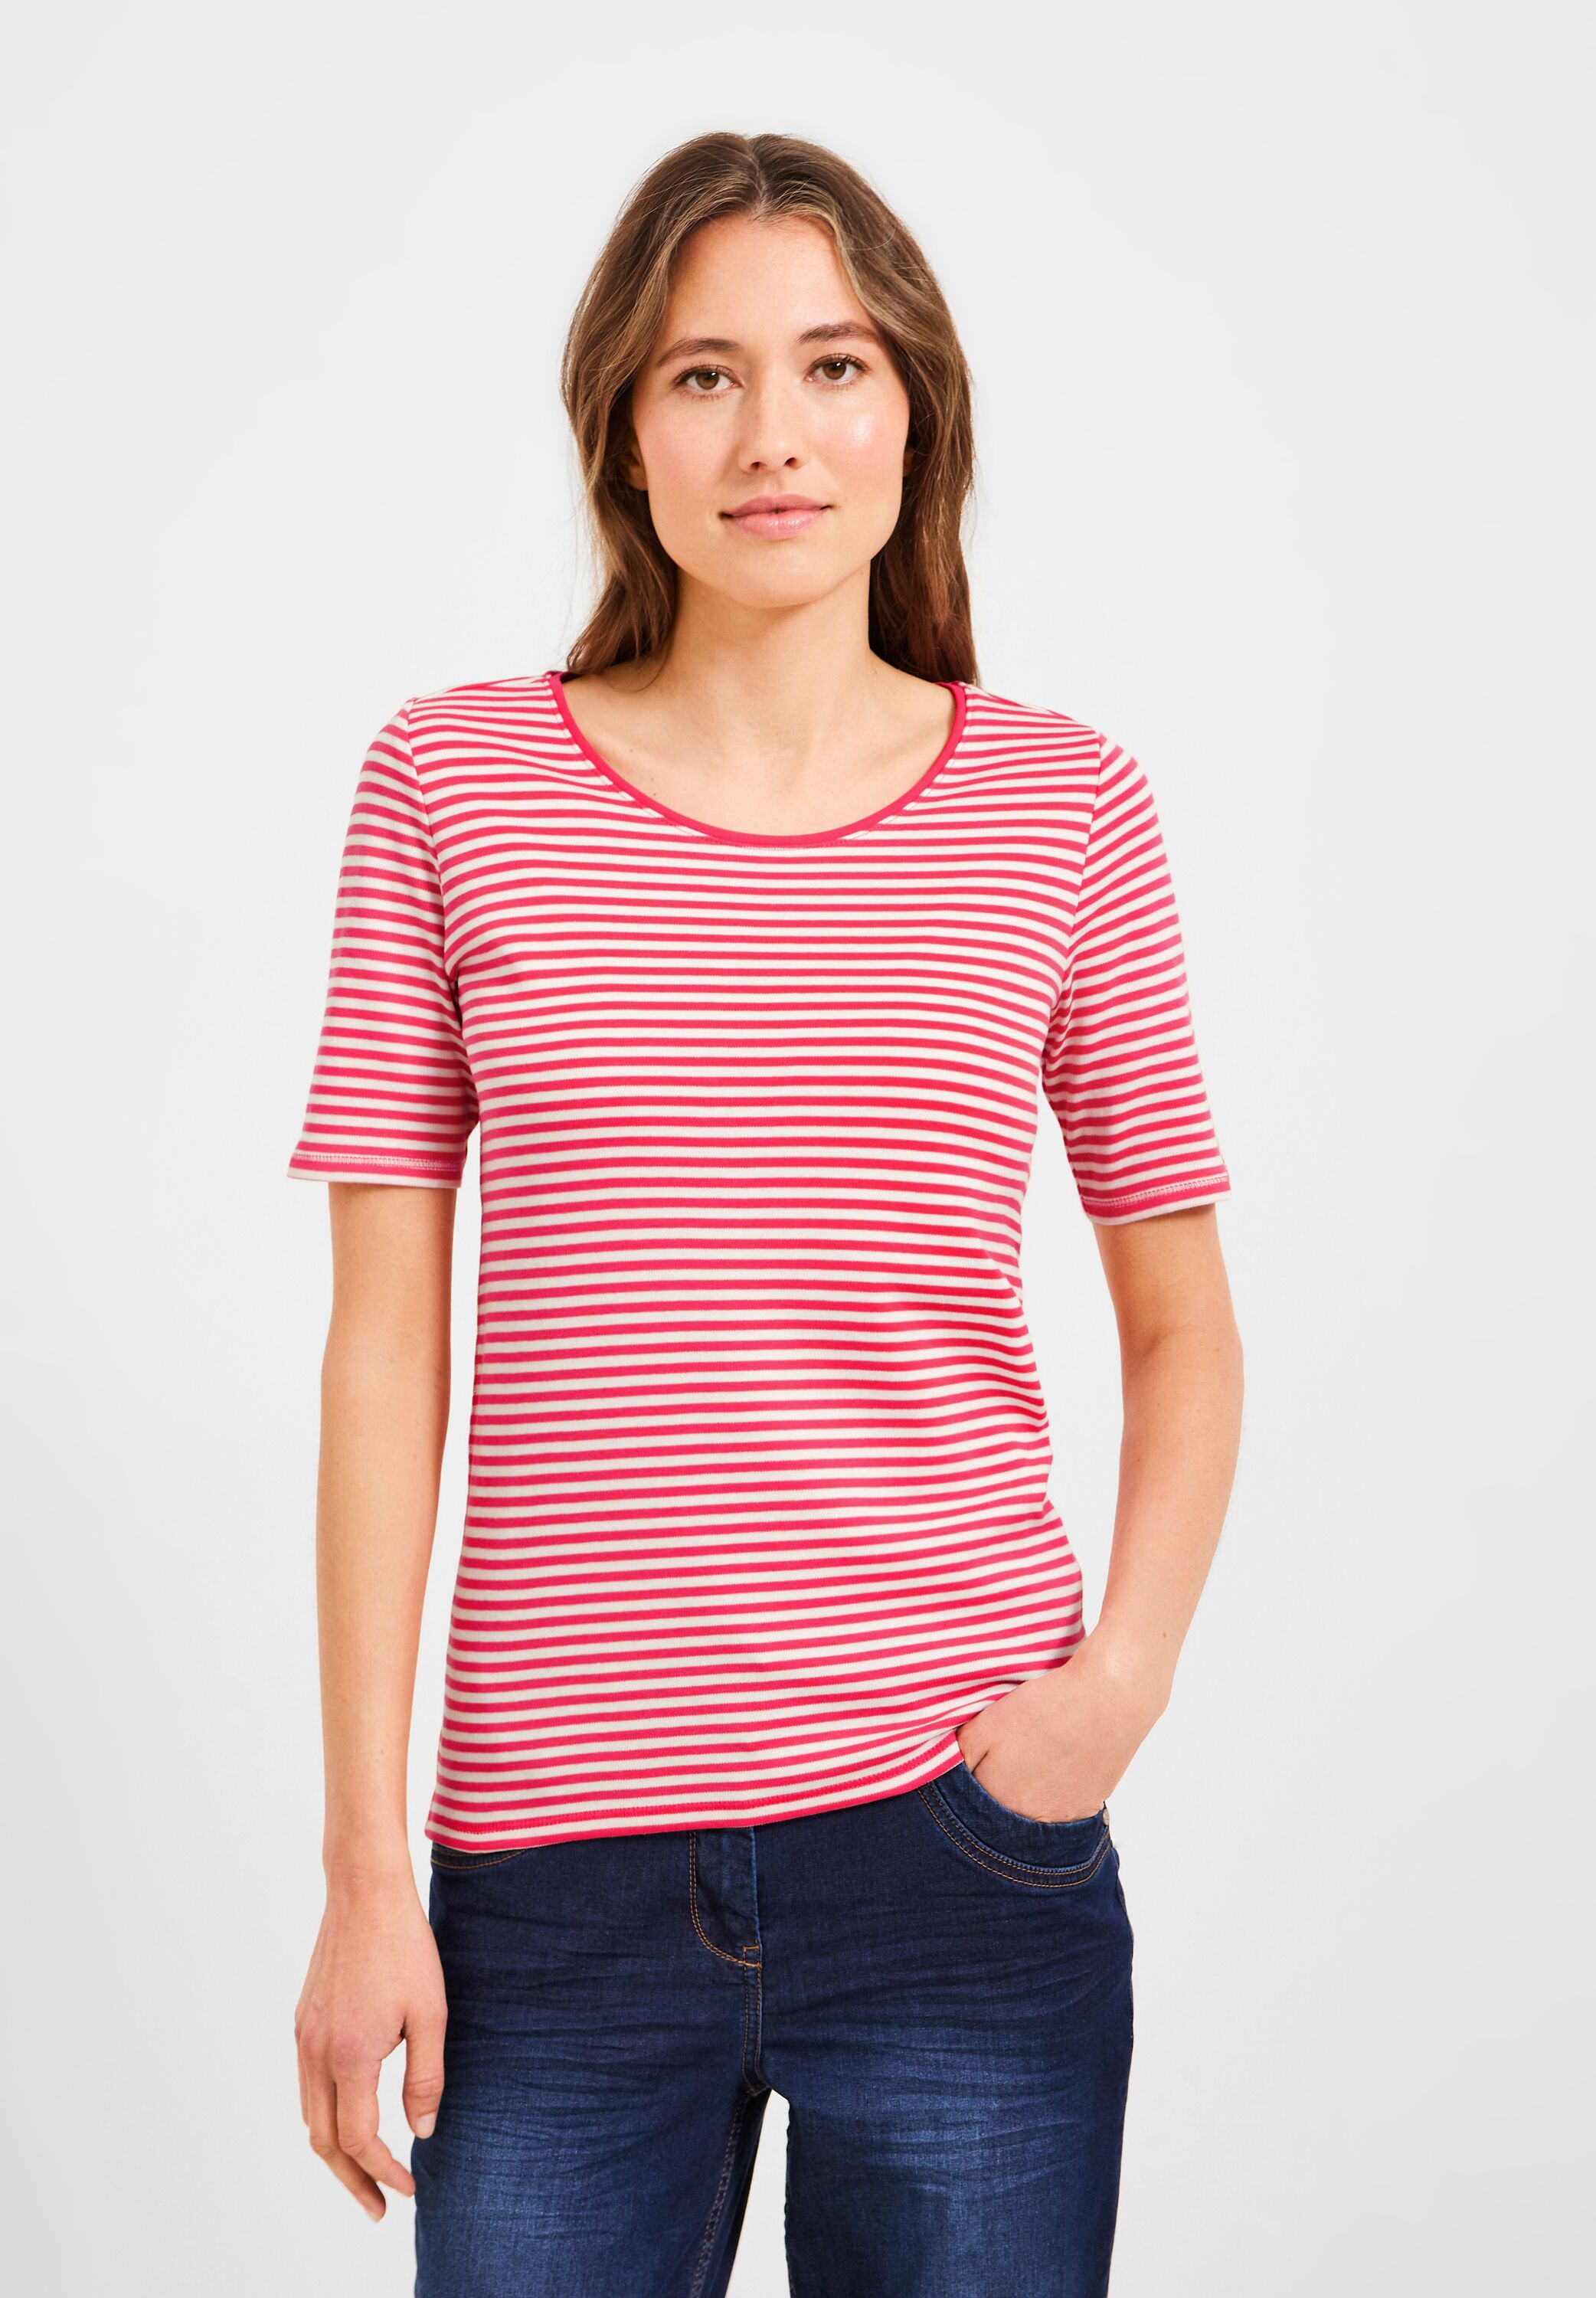 CECIL T-Shirt Lena reduziert - Red B319591-24472 Mode SALE in Strawberry im CONCEPT